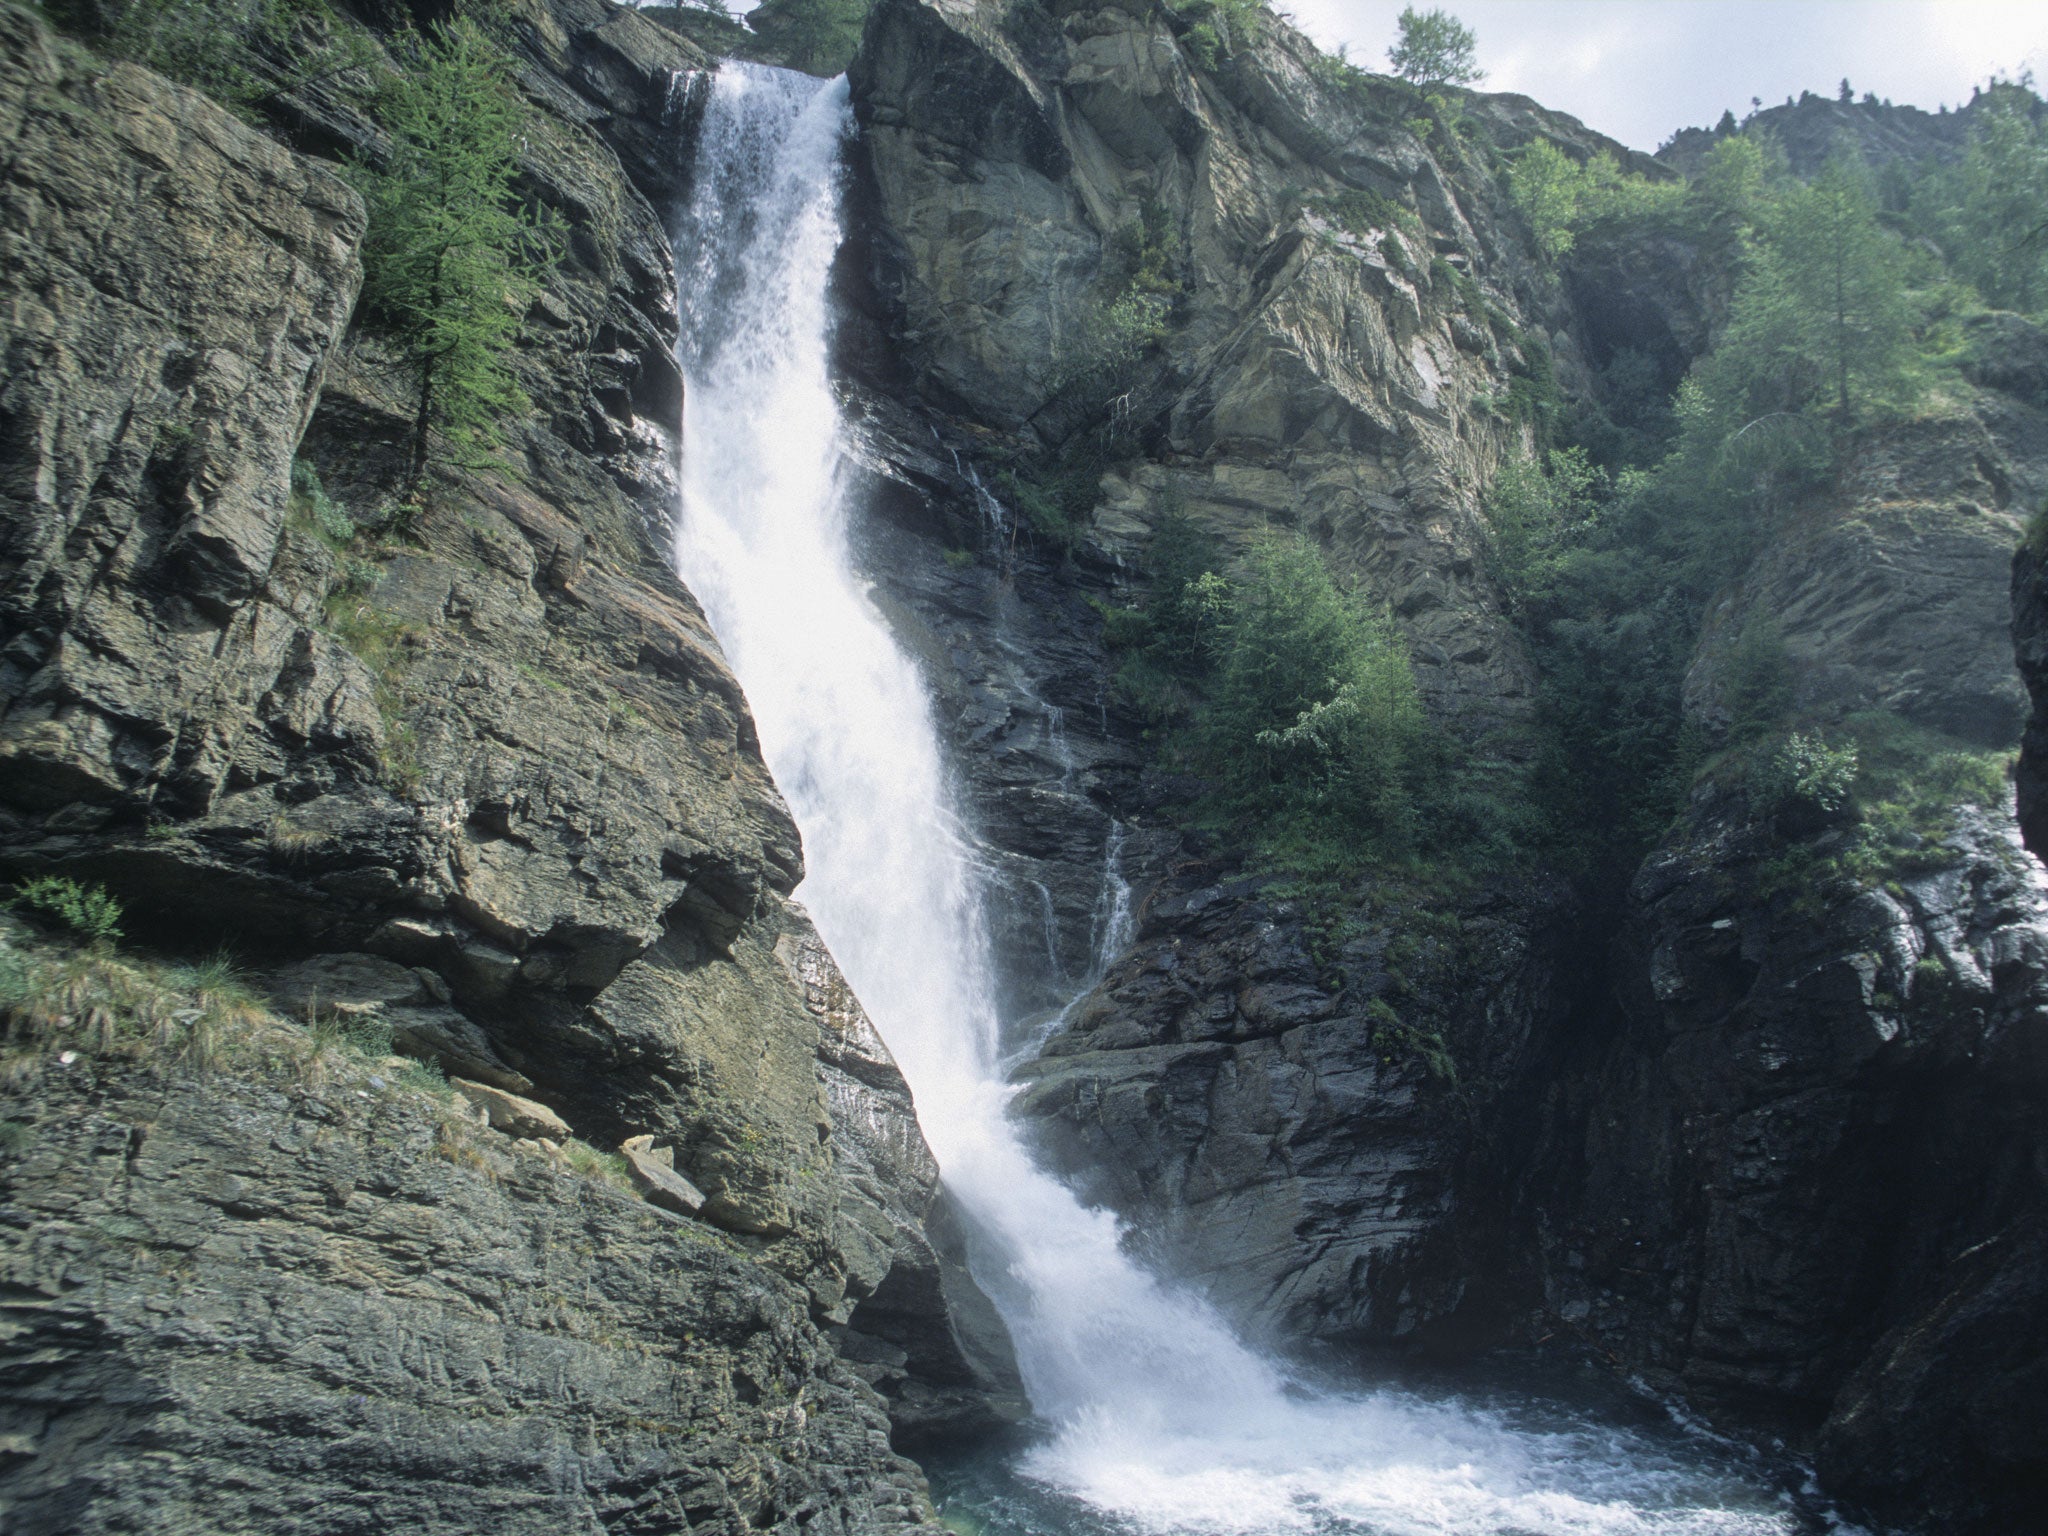 The 15-year-old boy, who has not been named, was part of a group visiting the Lillaz waterfalls near Cogne